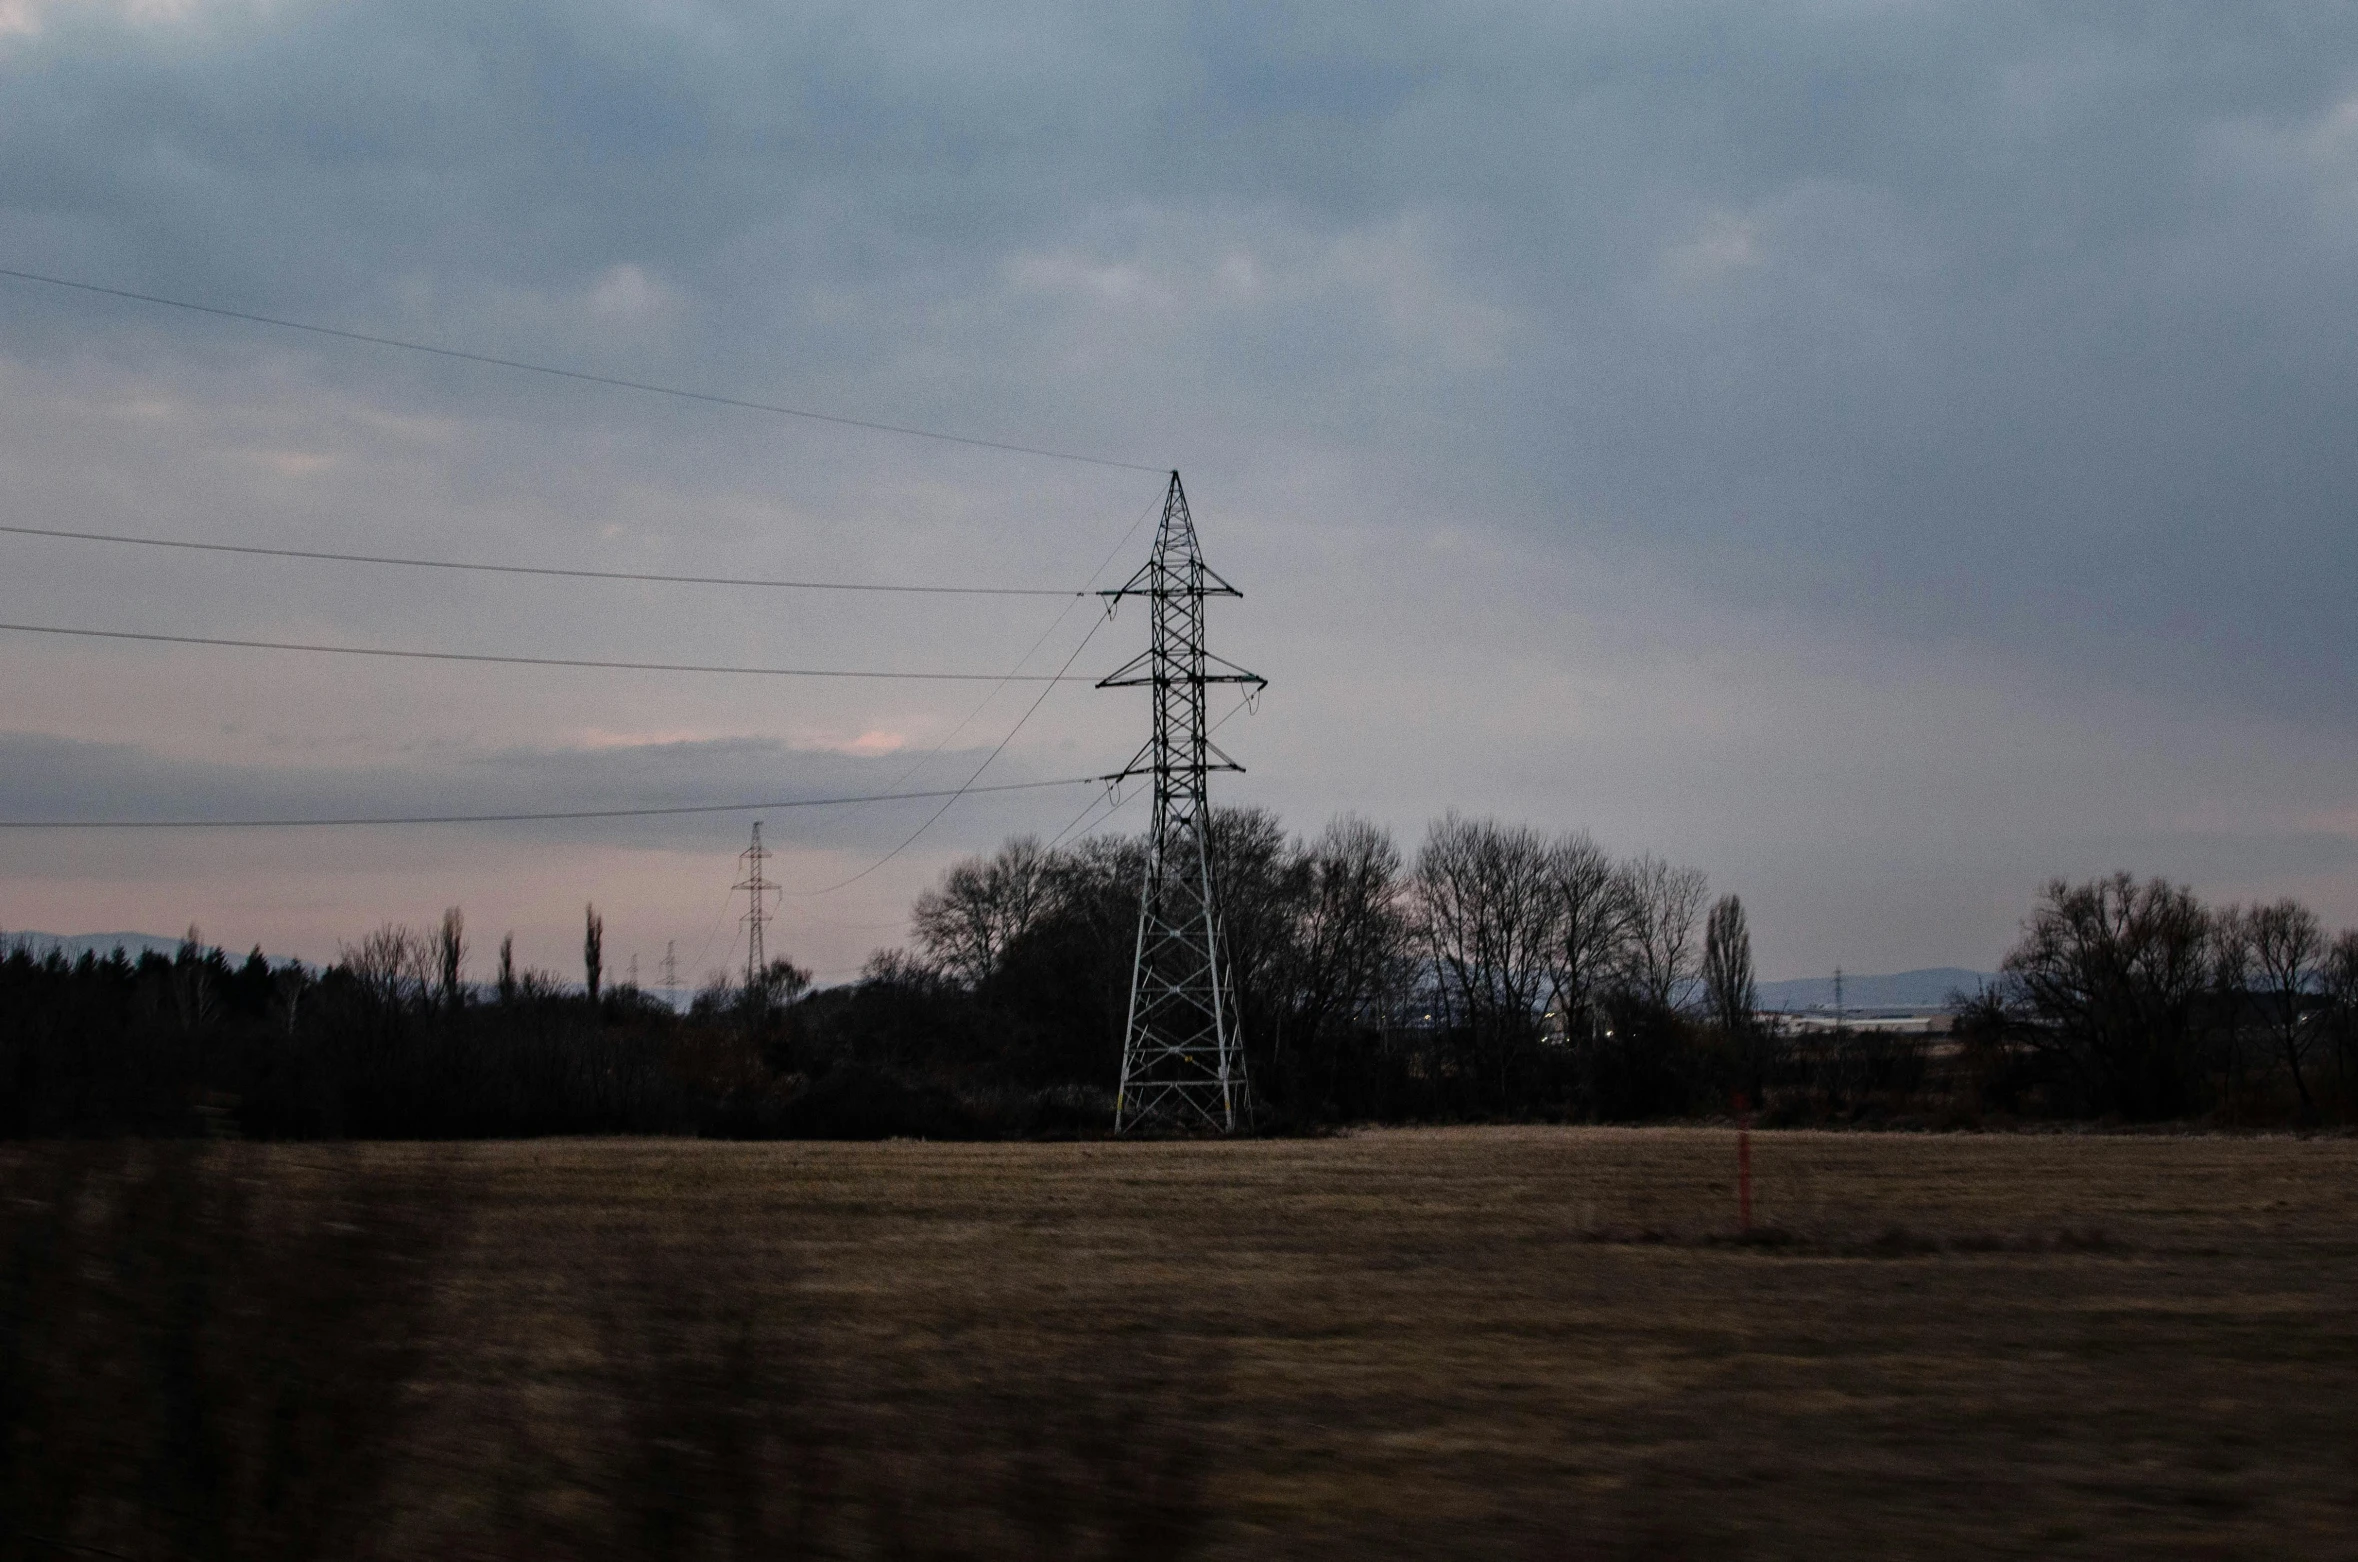 an electric pole near a grassy field and power lines